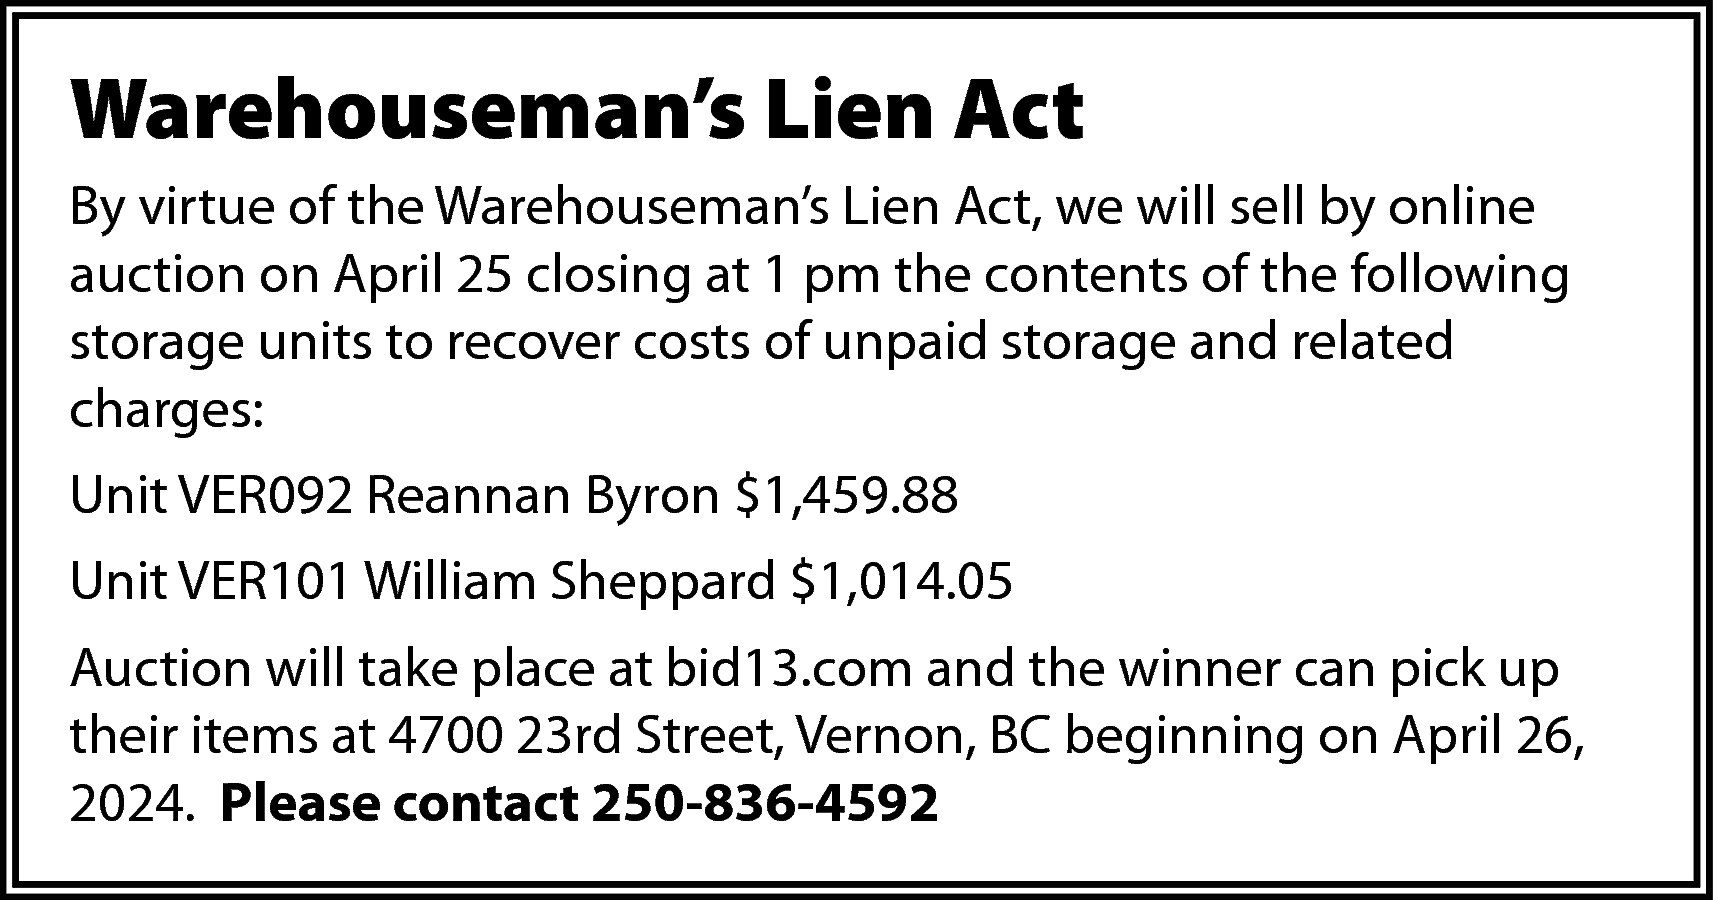 Warehouseman’s Lien Act <br>By virtue  Warehouseman’s Lien Act  By virtue of the Warehouseman’s Lien Act, we will sell by online  auction on April 25 closing at 1 pm the contents of the following  storage units to recover costs of unpaid storage and related  charges:  Unit VER092 Reannan Byron $1,459.88  Unit VER101 William Sheppard $1,014.05  Auction will take place at bid13.com and the winner can pick up  their items at 4700 23rd Street, Vernon, BC beginning on April 26,  2024. Please contact 250-836-4592    